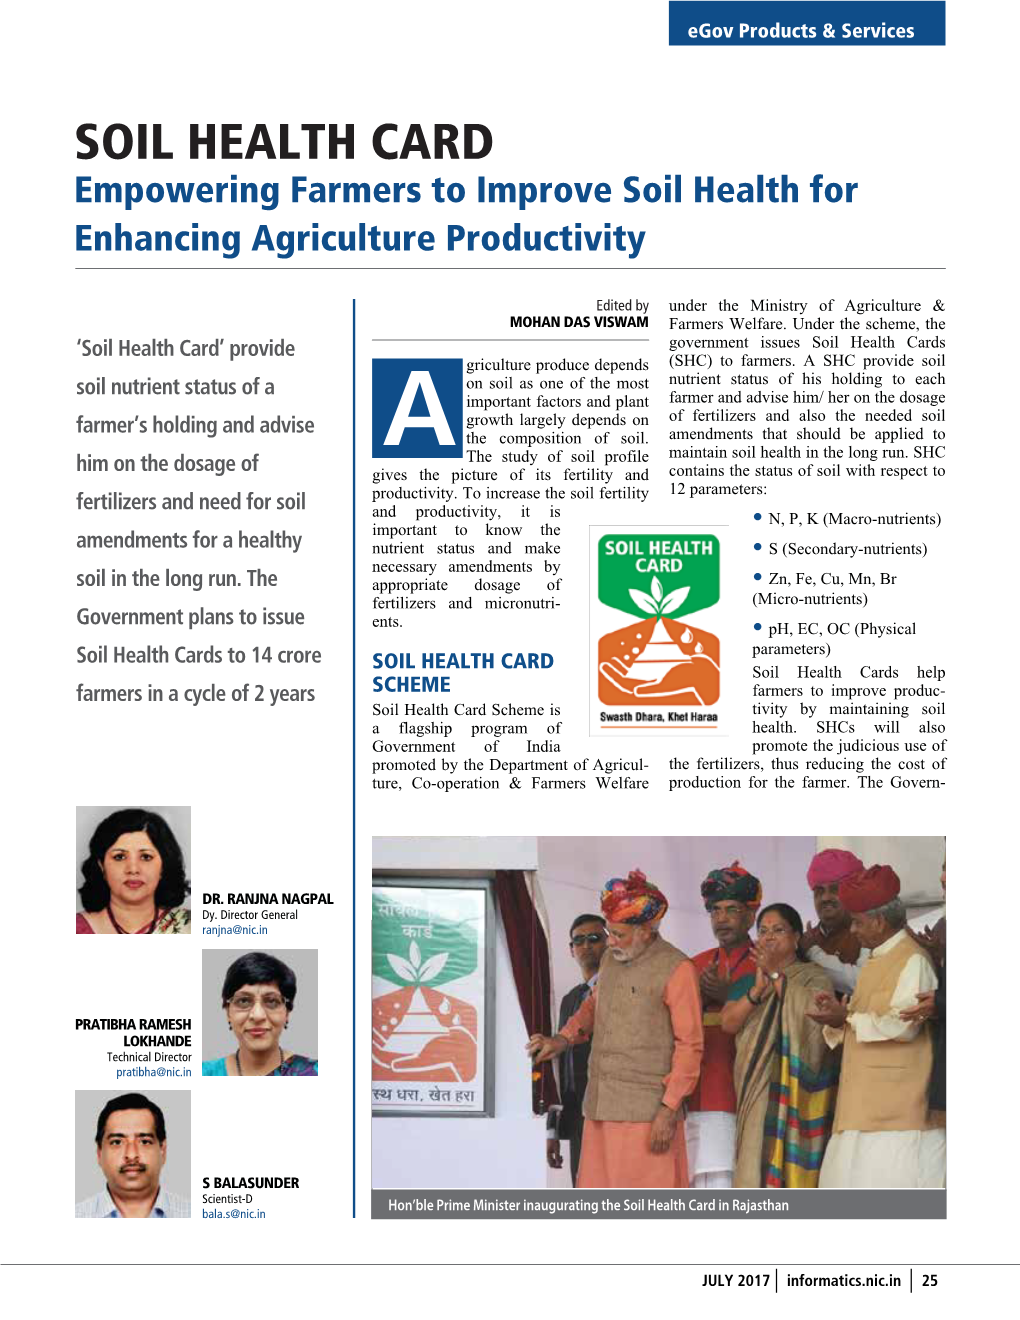 Soil Health Cards to • GIS Mapping SOIL HEALTH CARD 14 Crore Farmers in a Cycle of 2 Years